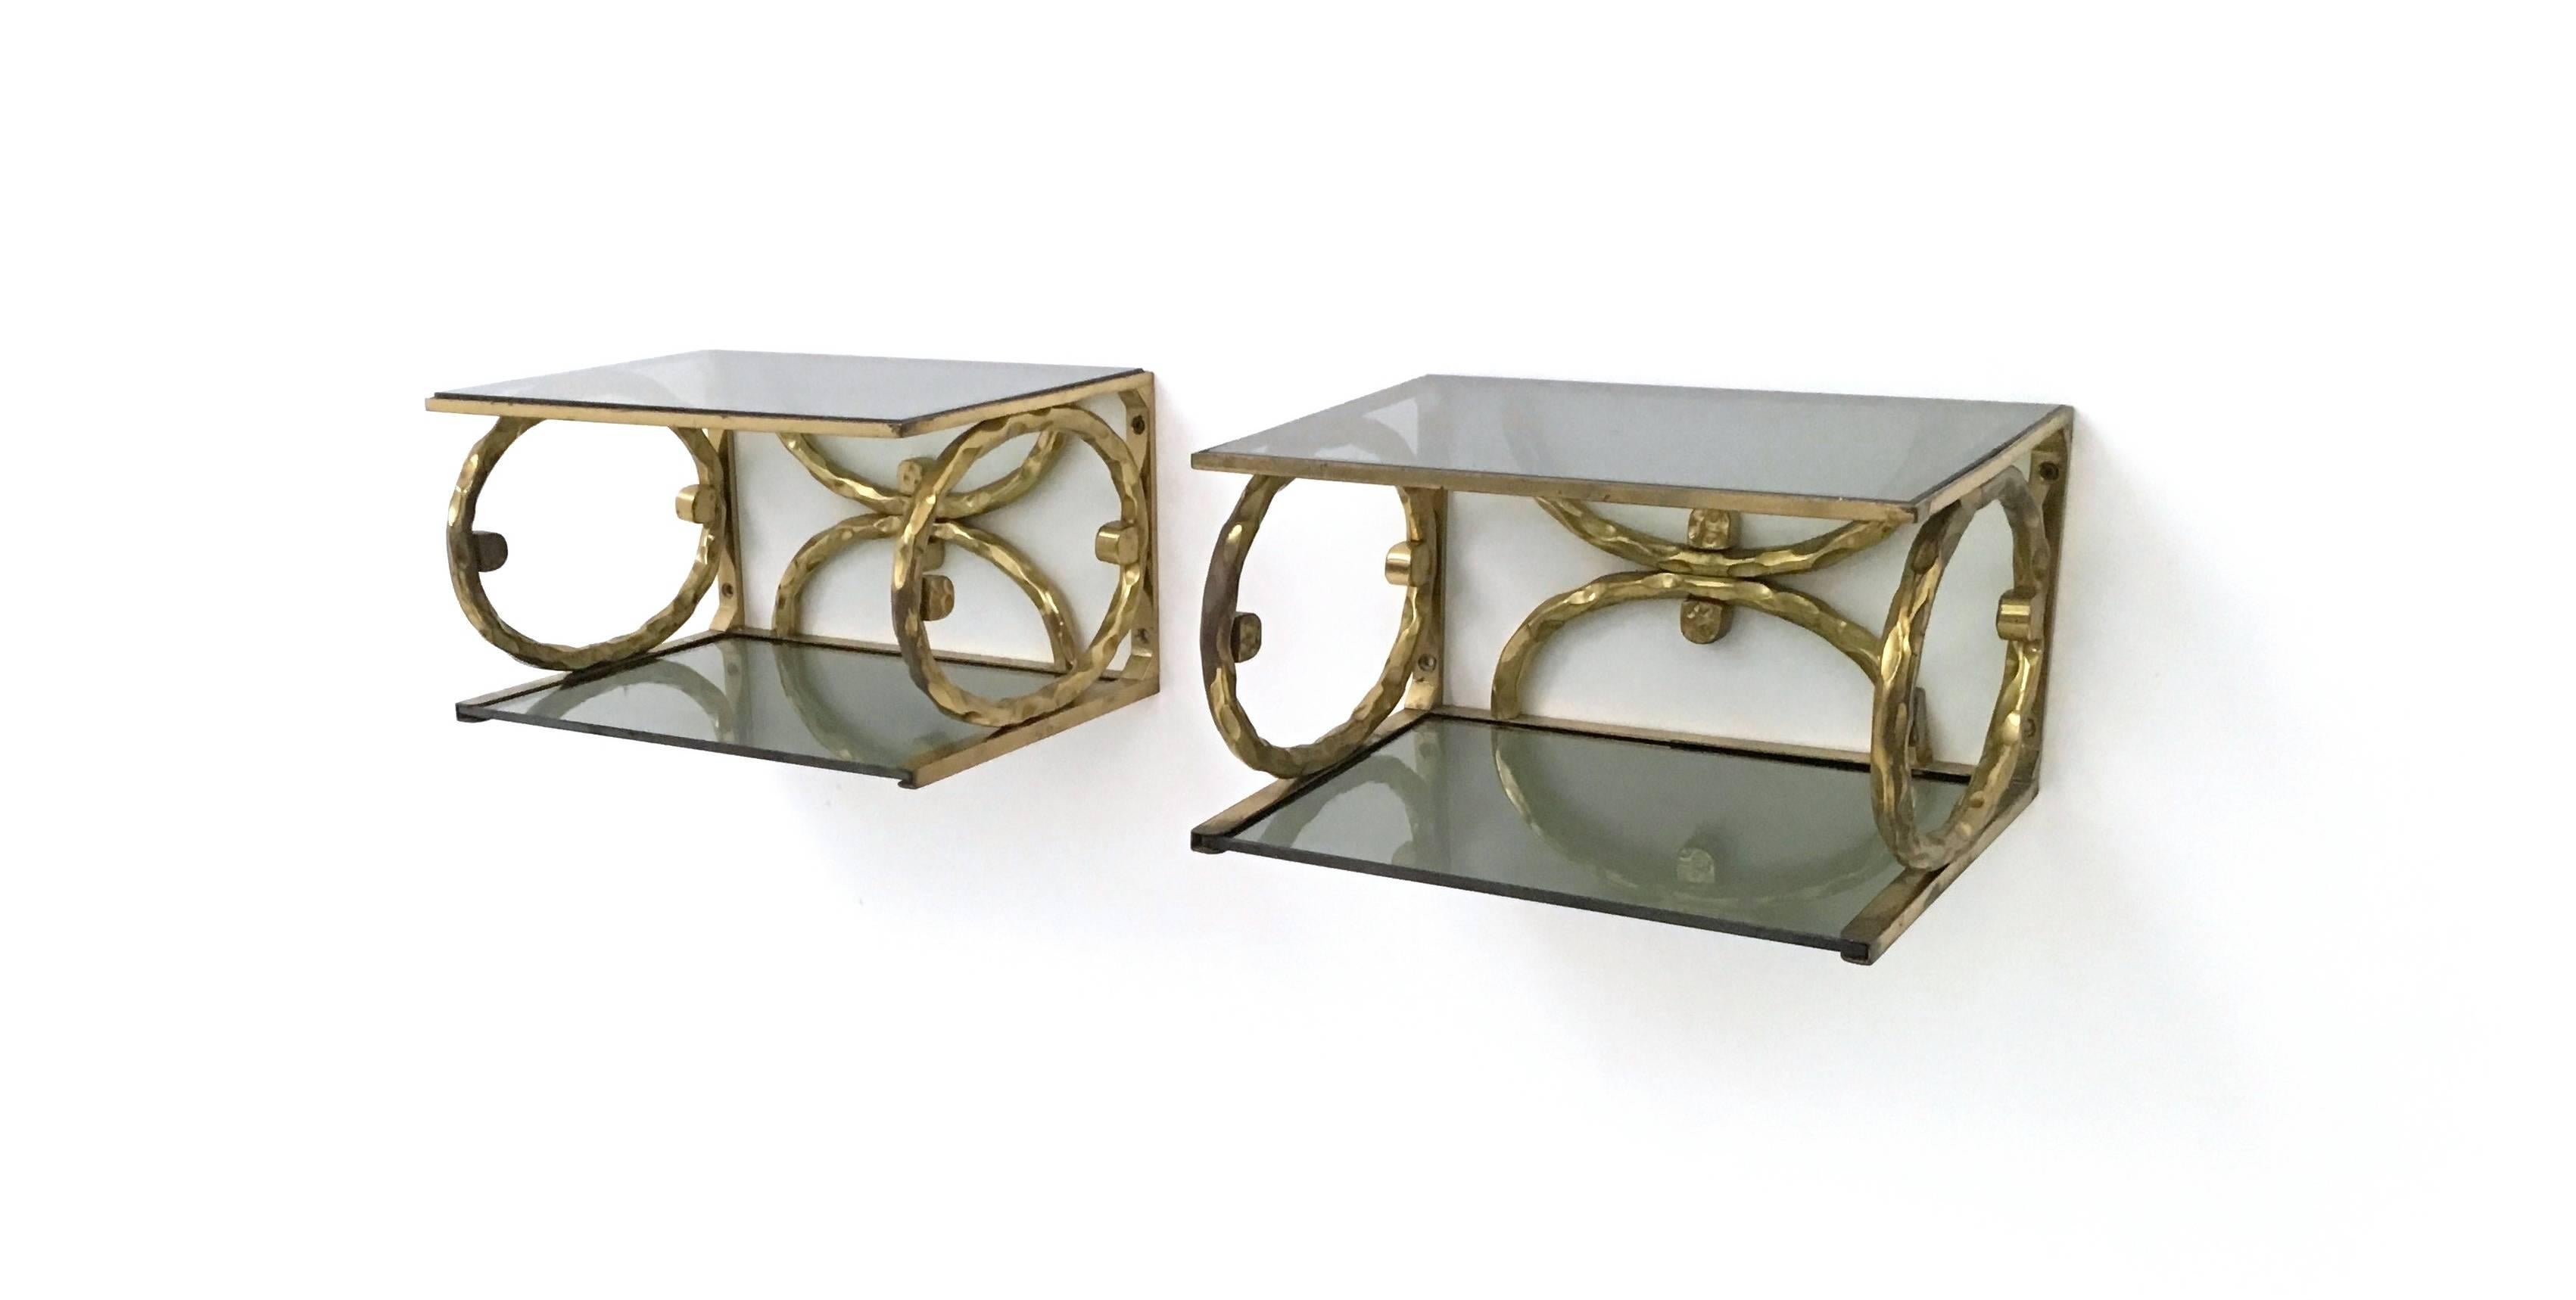 Hammered Pair of Wall Consoles Attributed to O. Borsani and A. Pomodoro for Tecno, 1960s